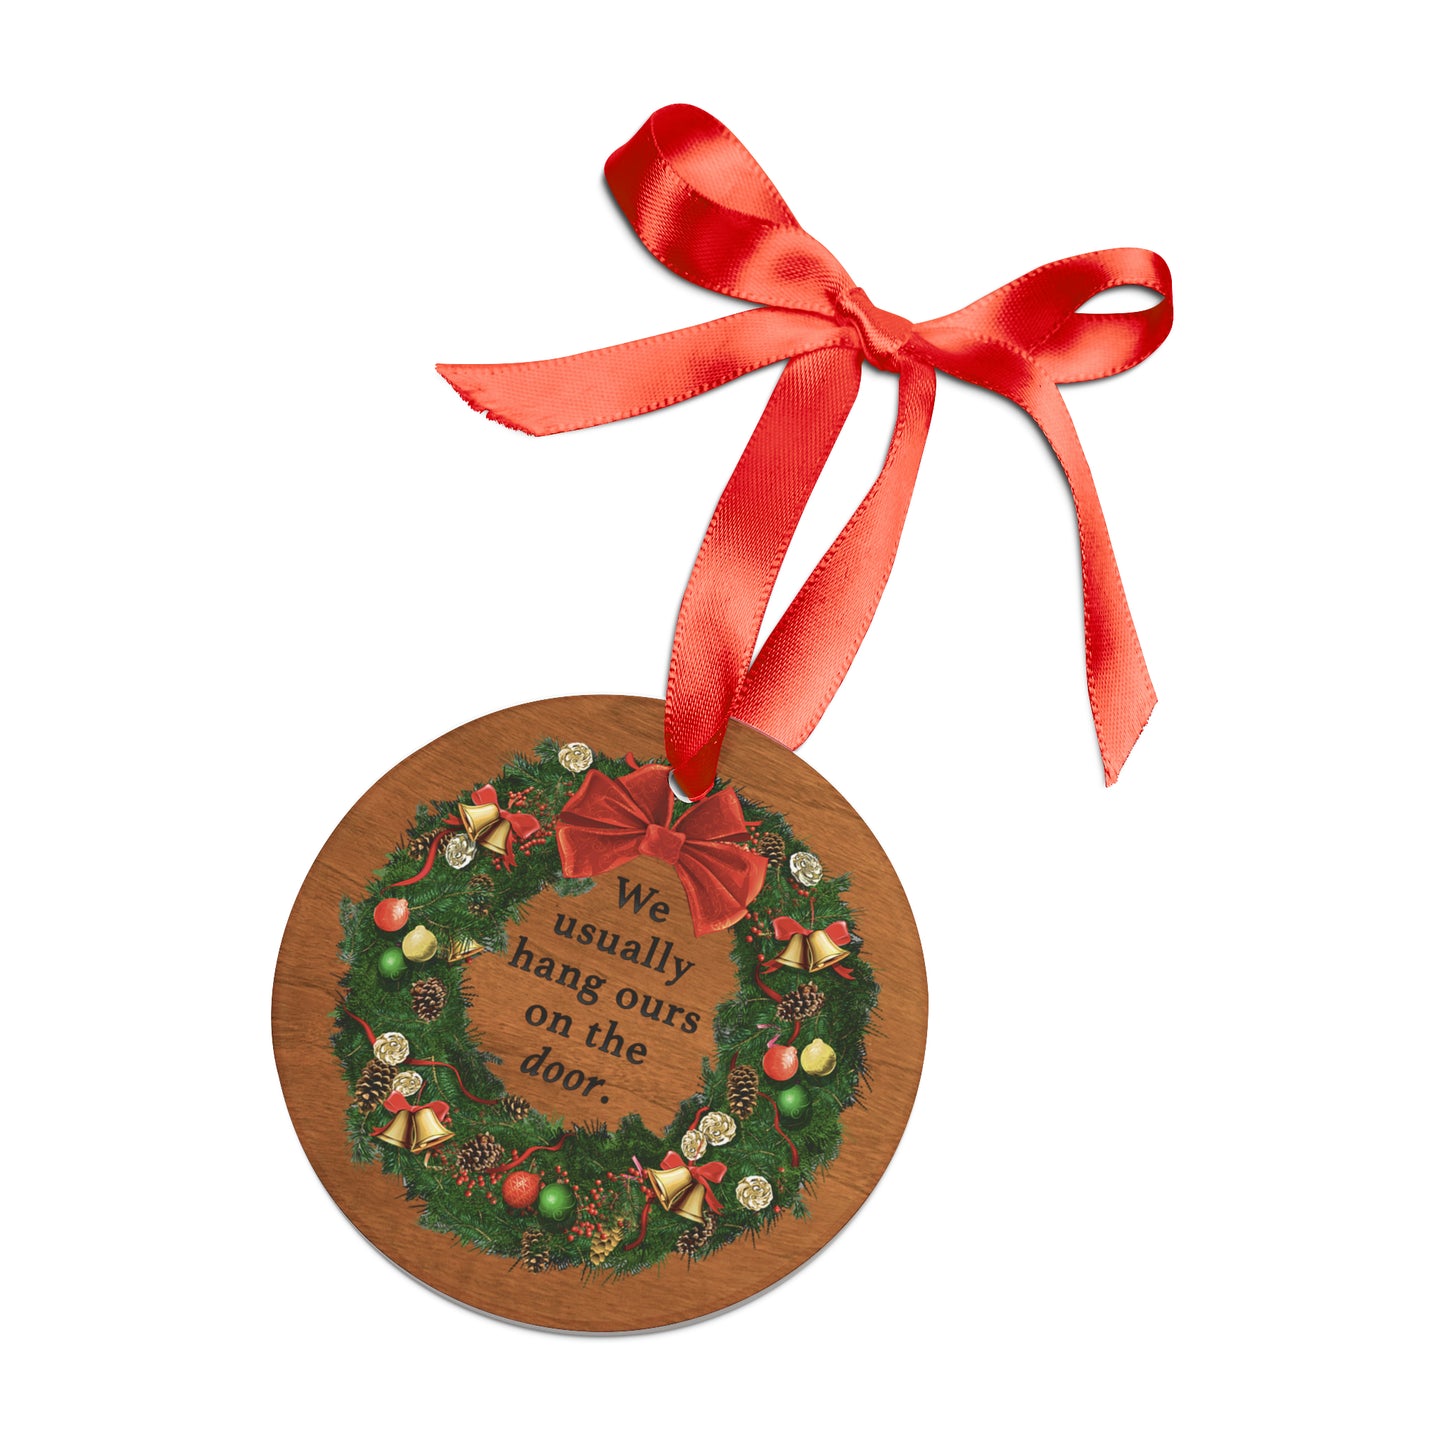 ELR Classic Quote Christmas Ornament (black writing)